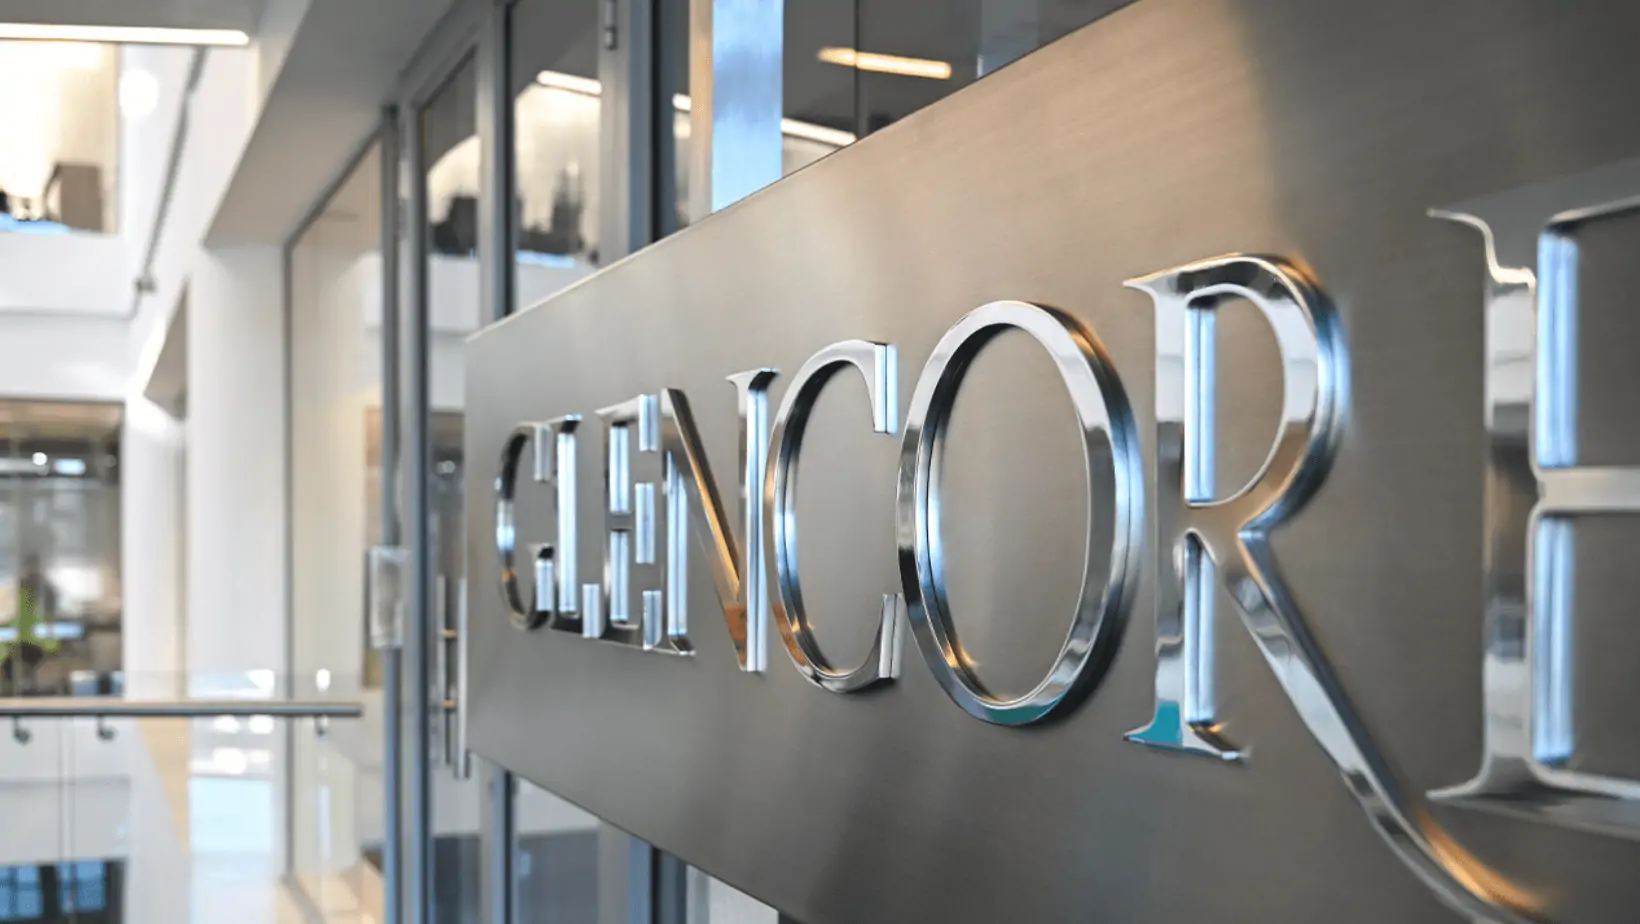 Glencore’s Currency Choice: Maximizing Dividends for Shareholders